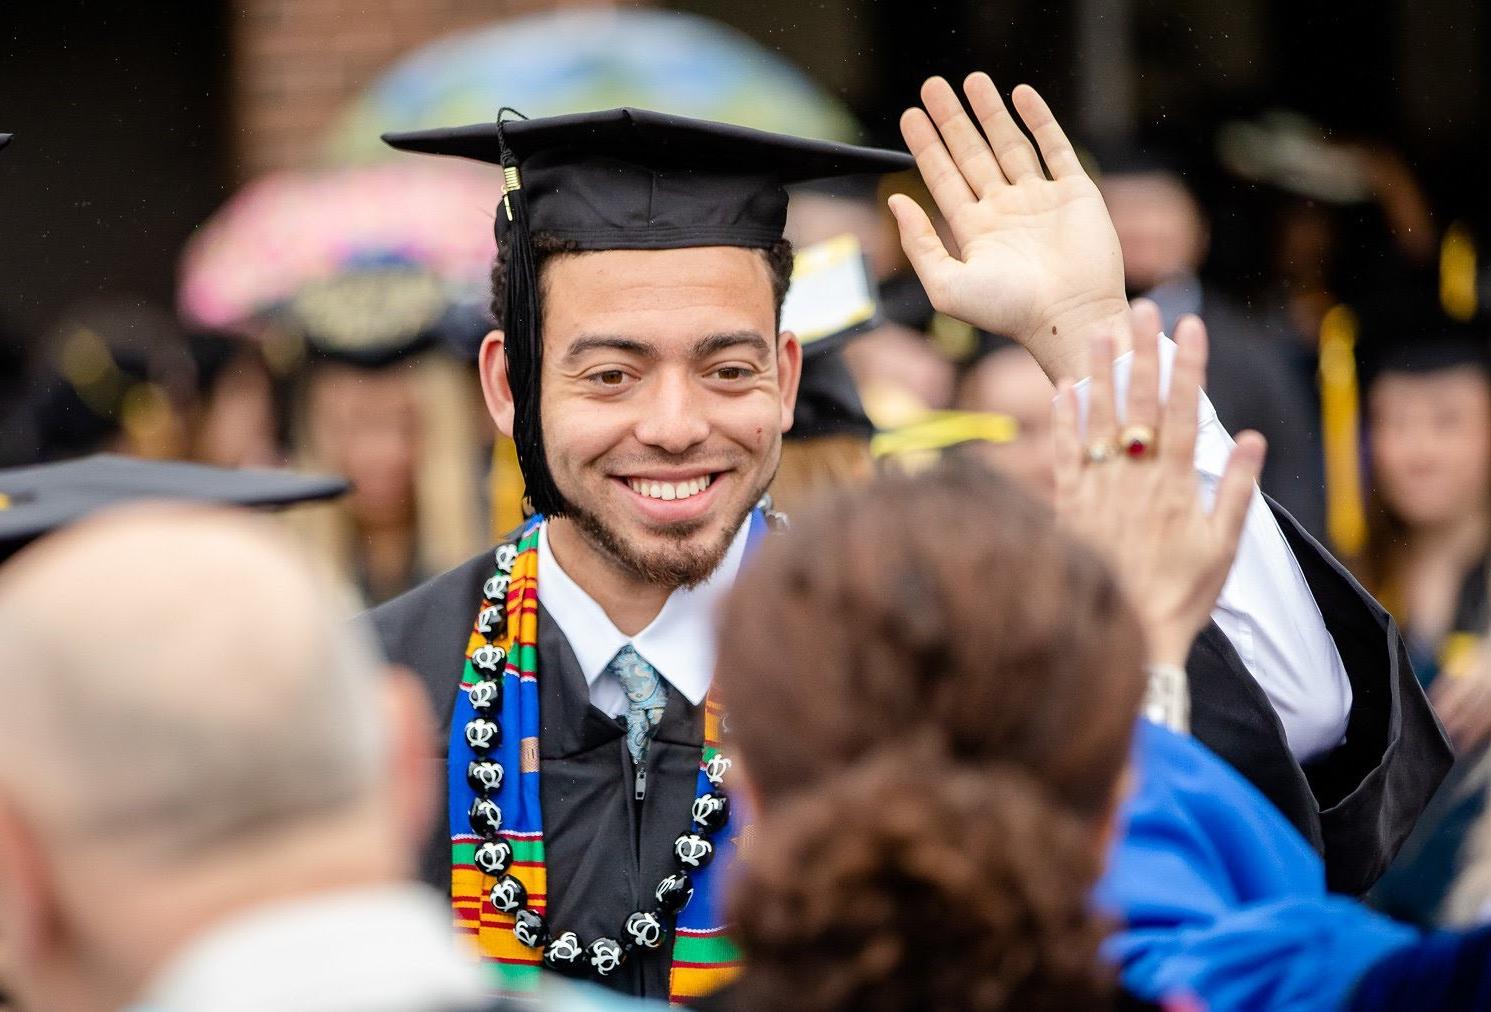 Graduating student giving a high-five